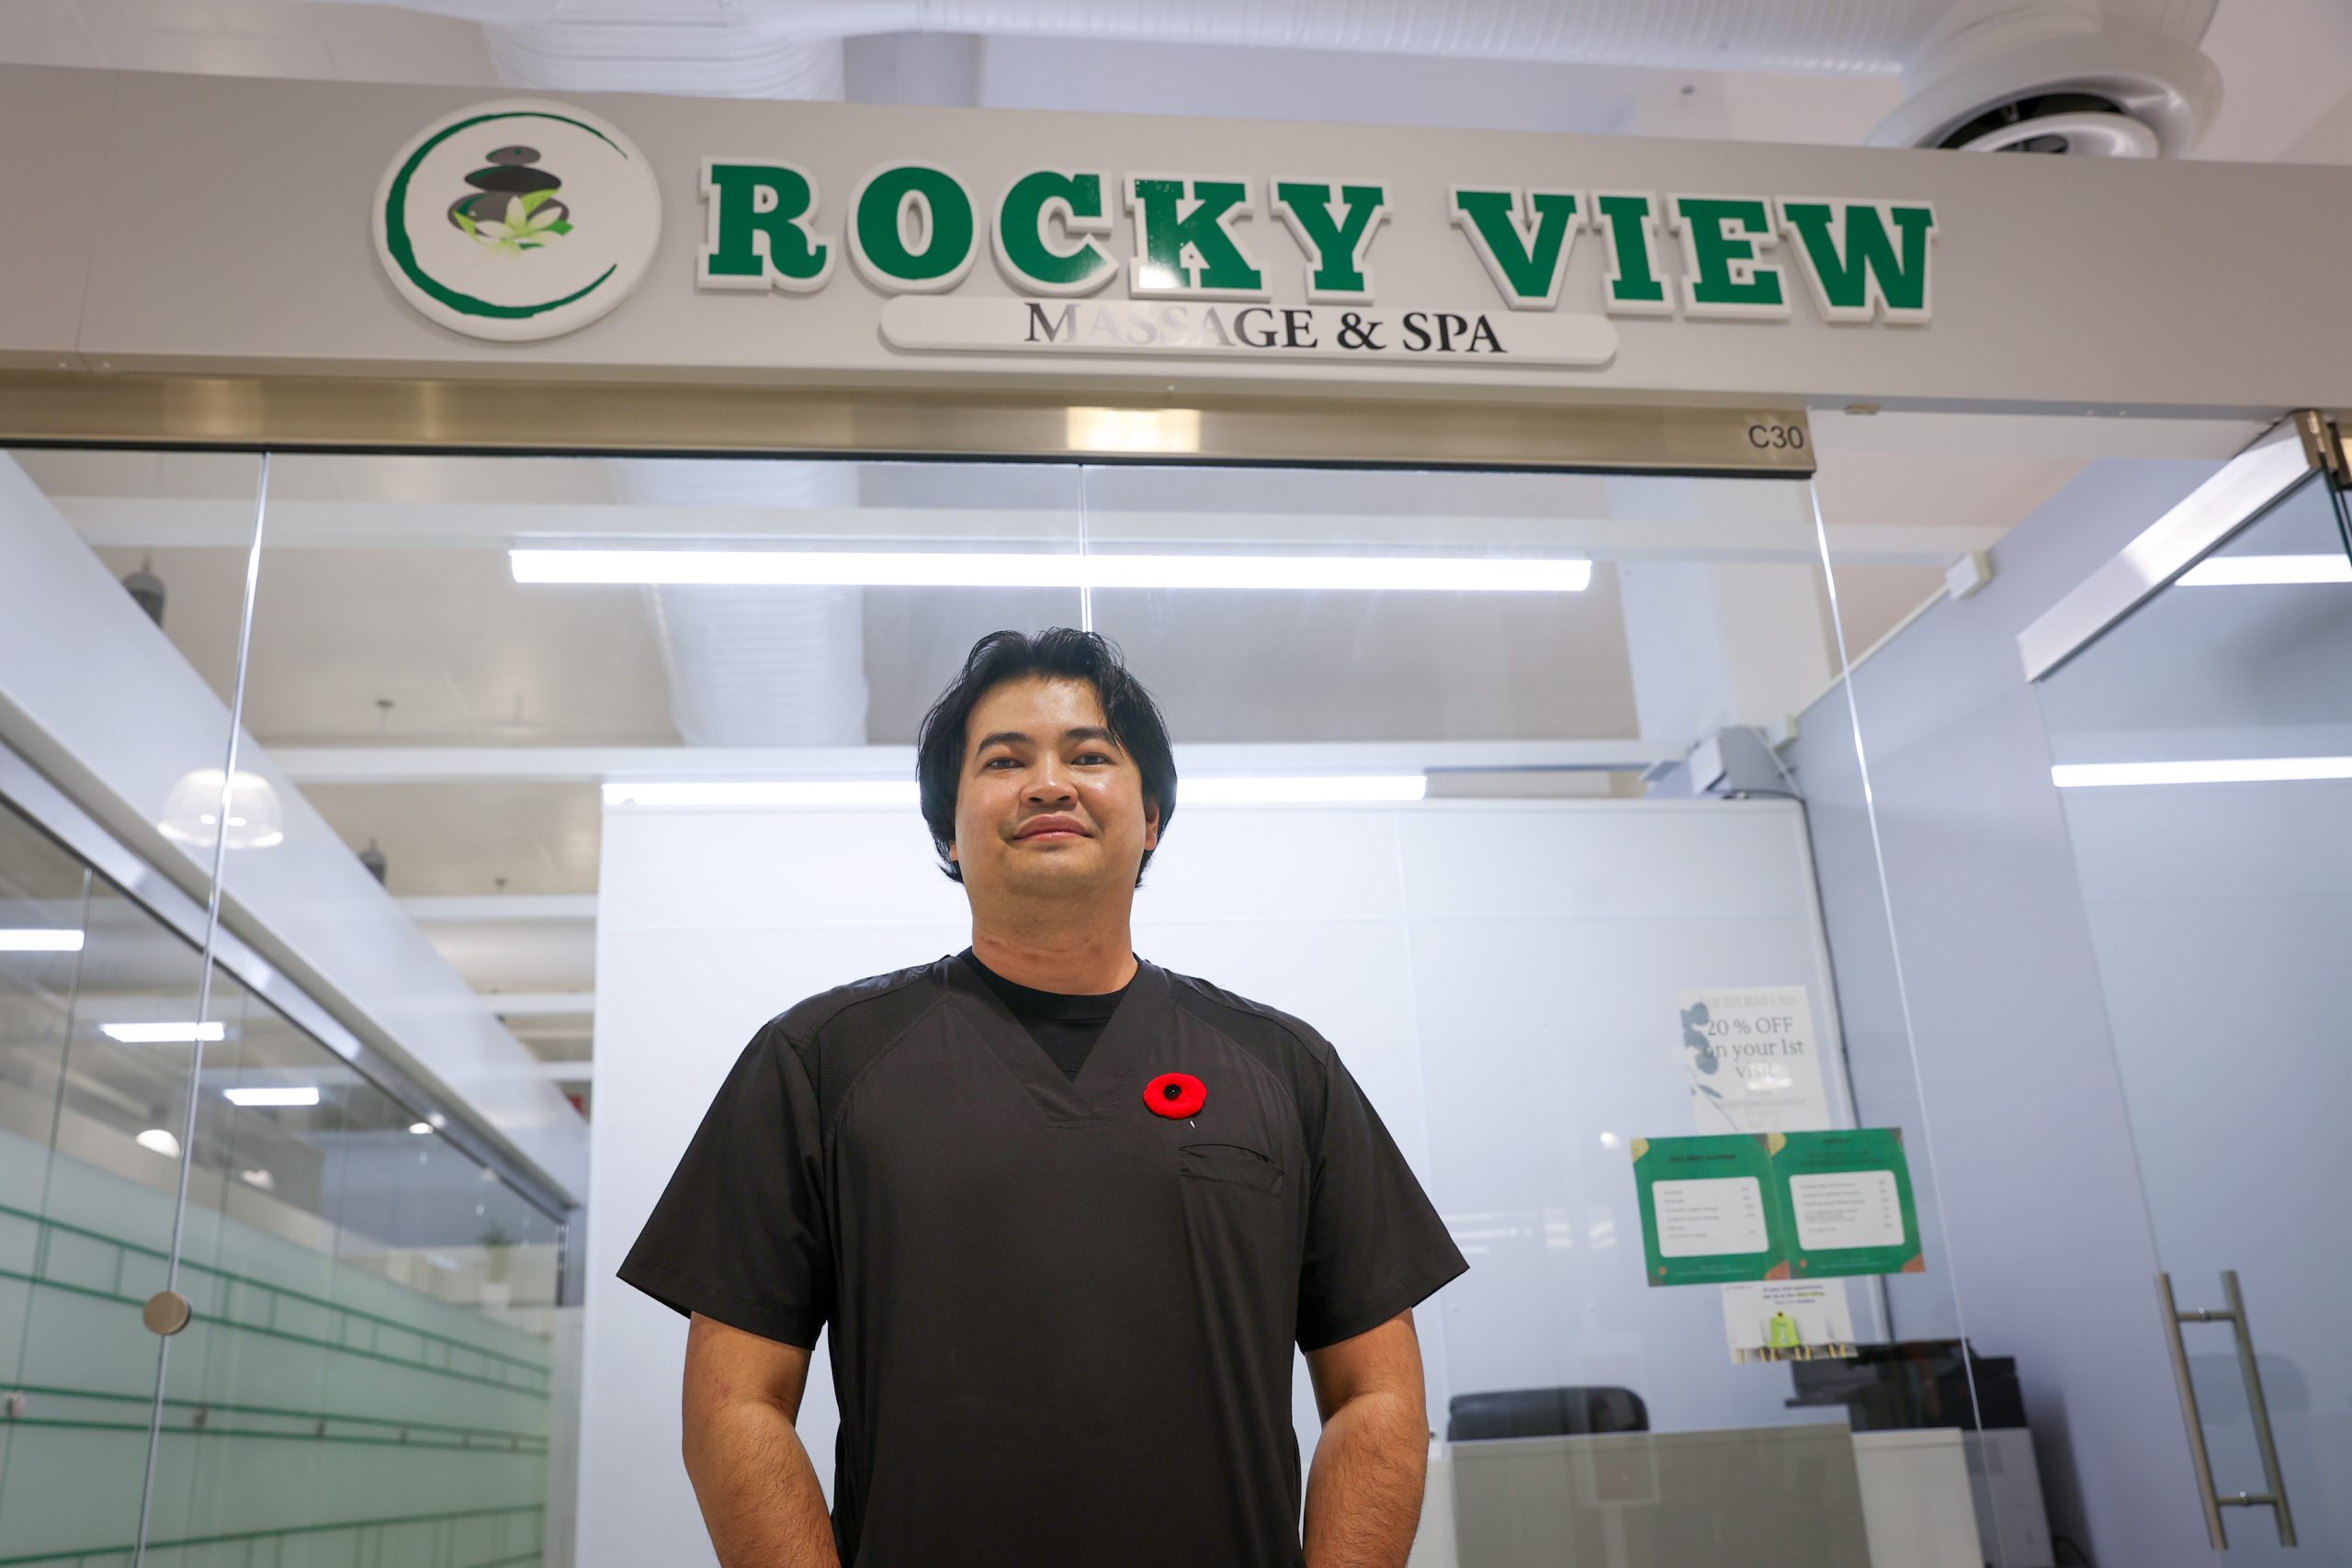 Emmanuel, a young Filipino man stands outside of the spa he co-owns, Rockyview Massage and Spa, in New Horizon Mall outside of Calgary ,Alberta, Canada